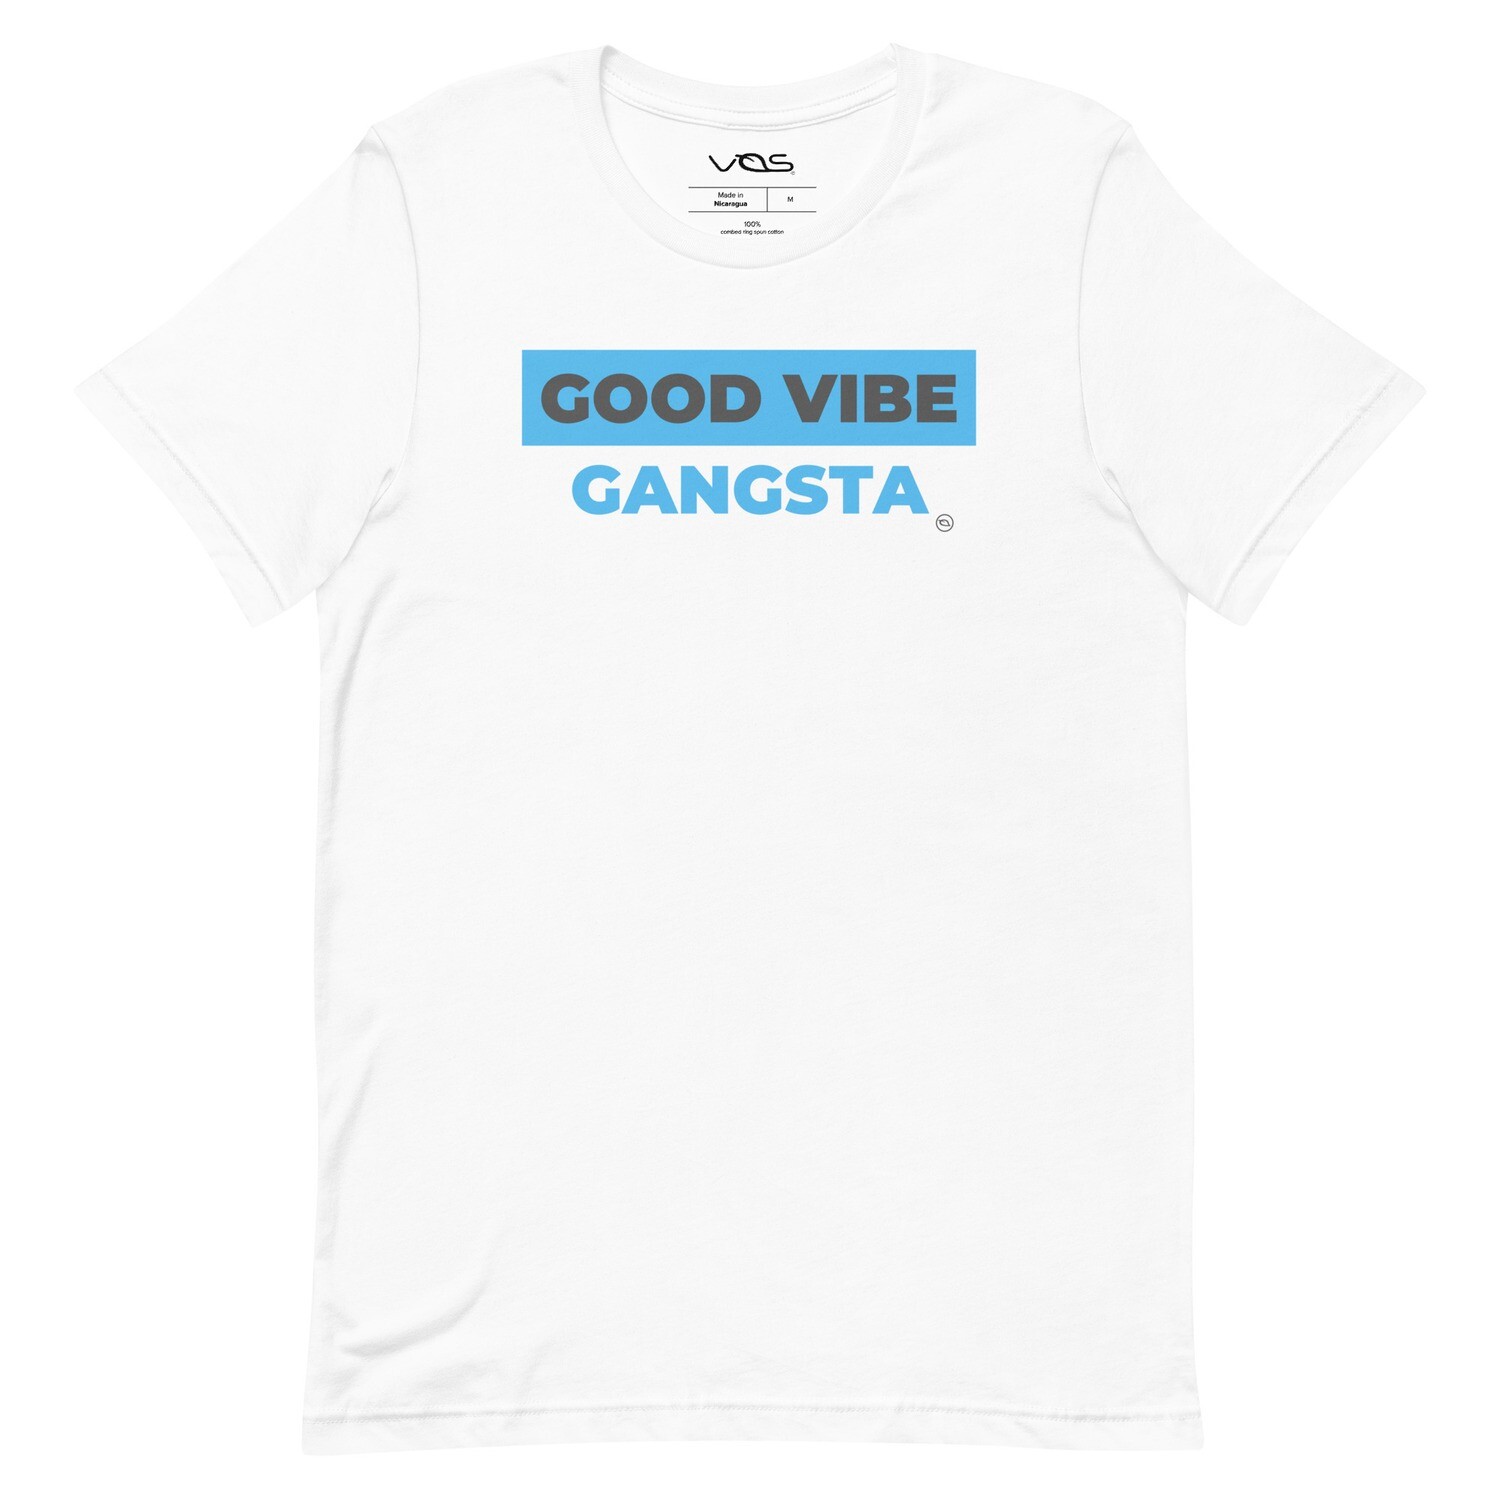 Good Vibe Gangsta | VOS | Day One T-Shirt